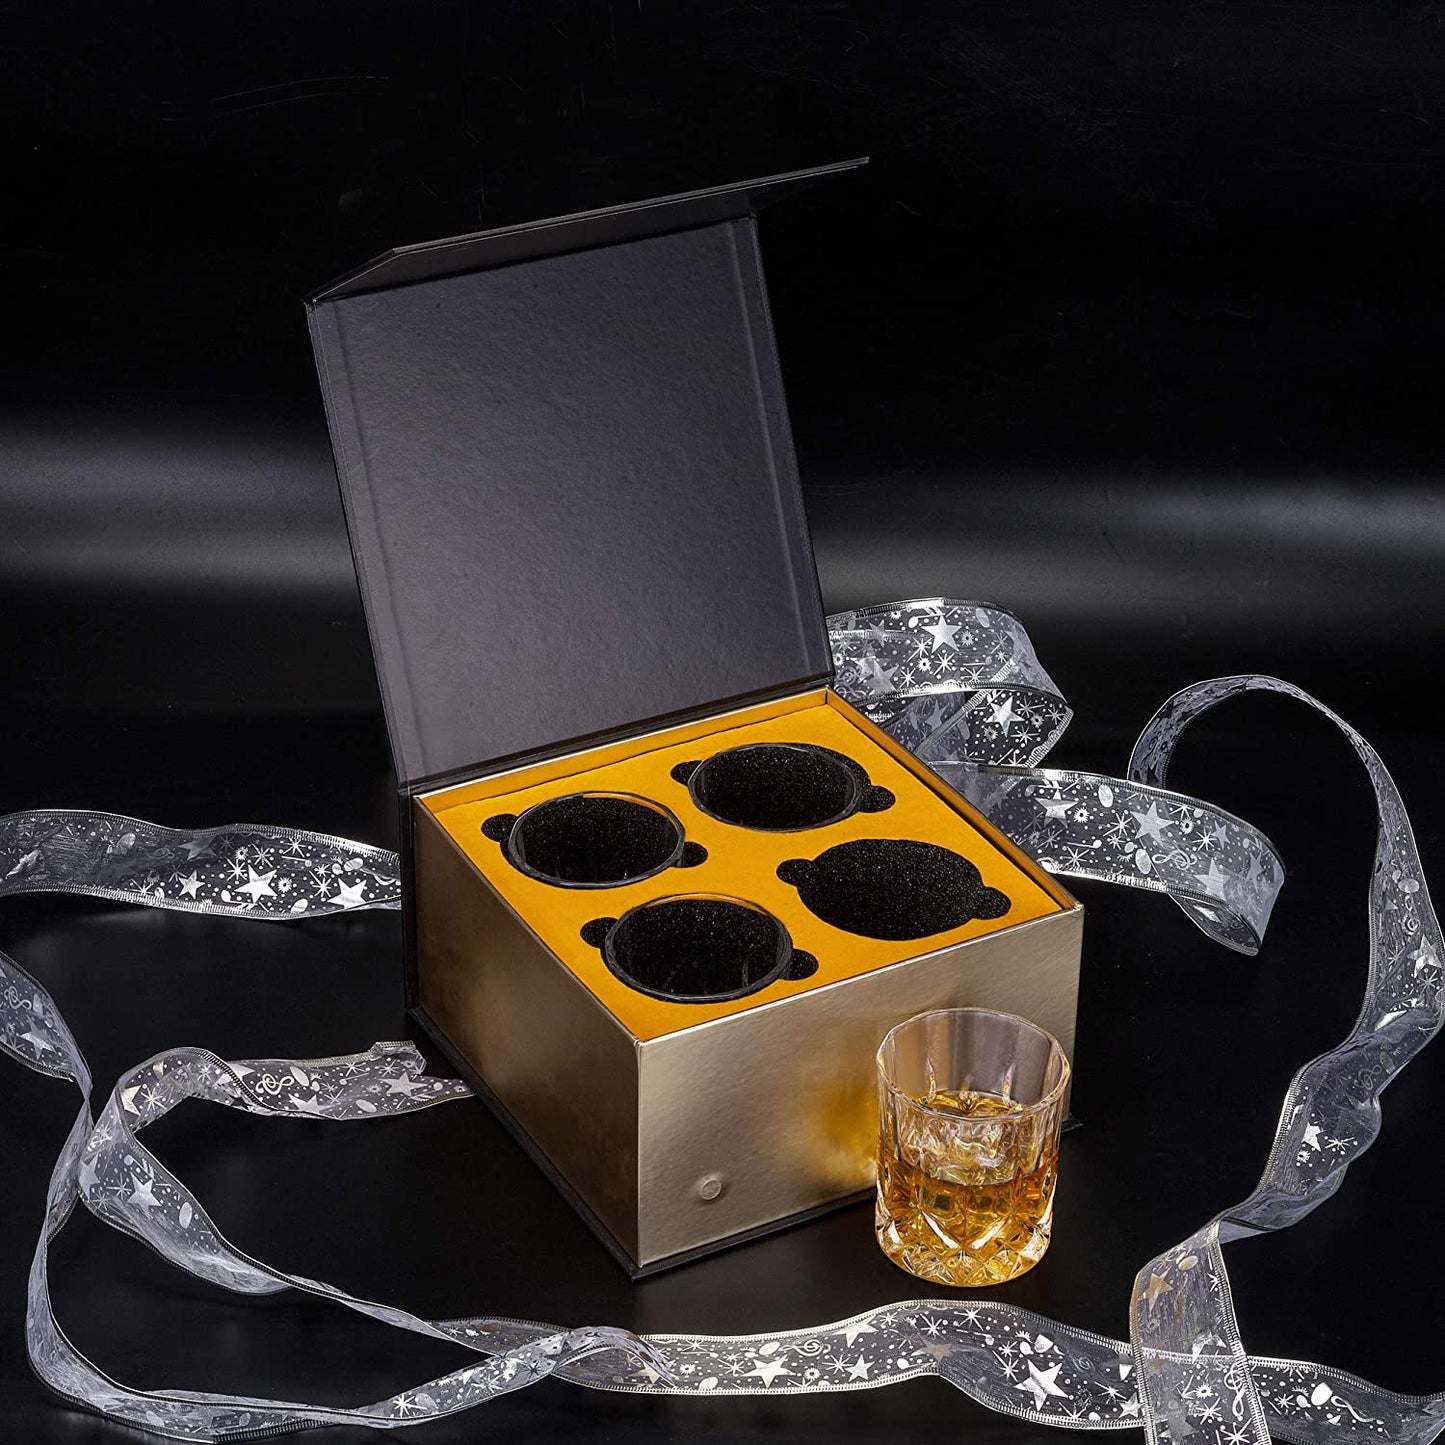 Old Fashioned Whiskey Glasses with Luxury Box - 10 Oz Rocks Barware for Scotch, Bourbon, Liquor and Cocktail Drinks - Set of 4